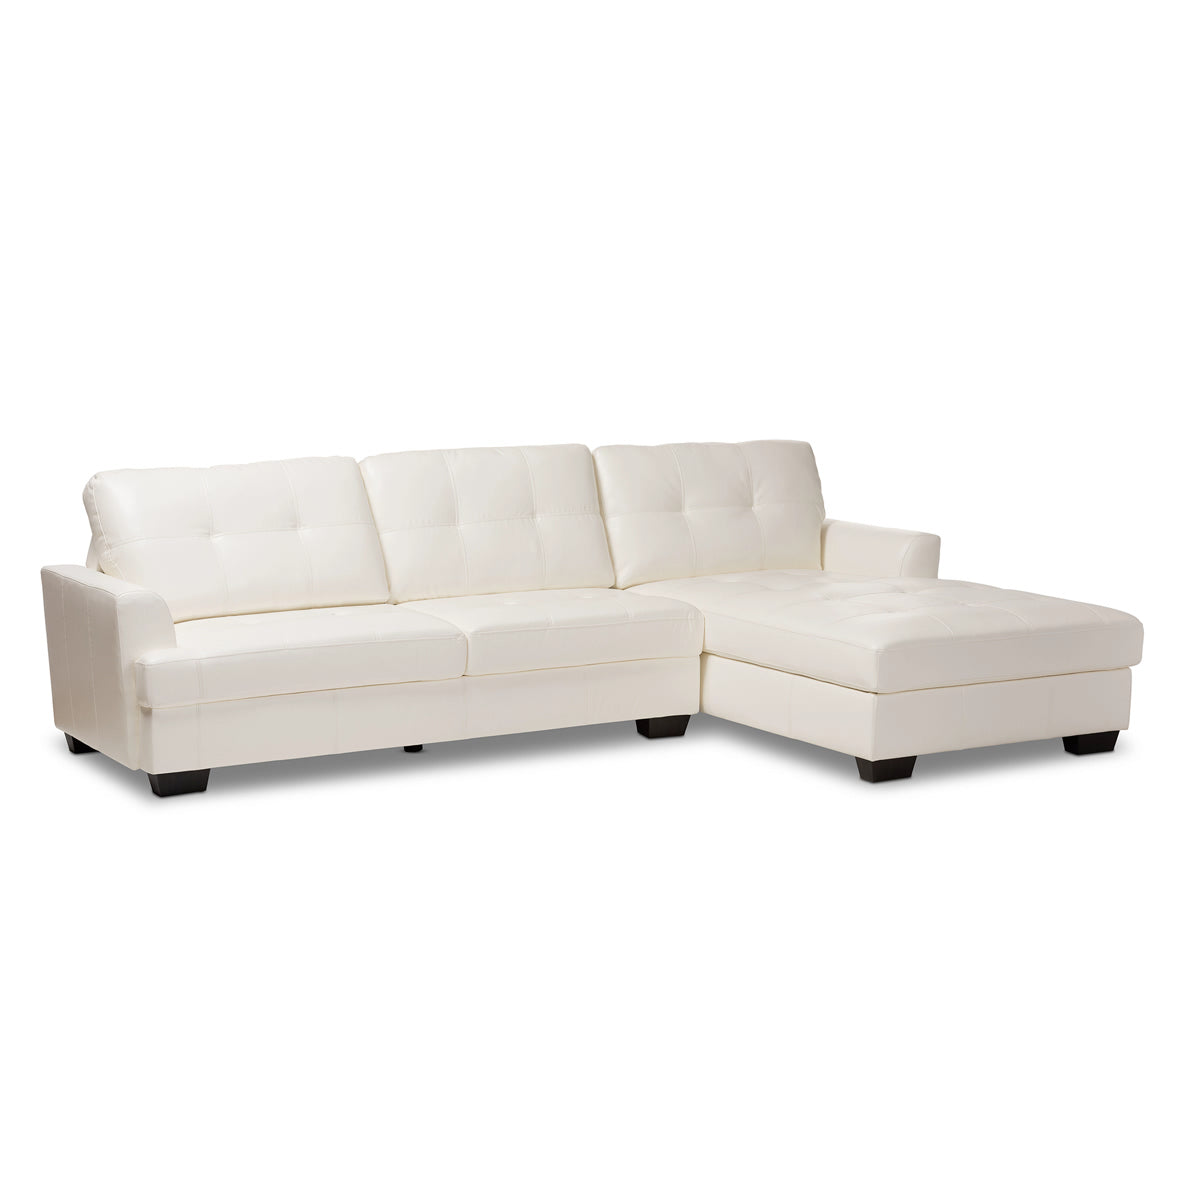 Baxton Studio Adalynn Modern and Contemporary White Faux Leather Upholstered Sectional Sofa Baxton Studio-sofas-Minimal And Modern - 1